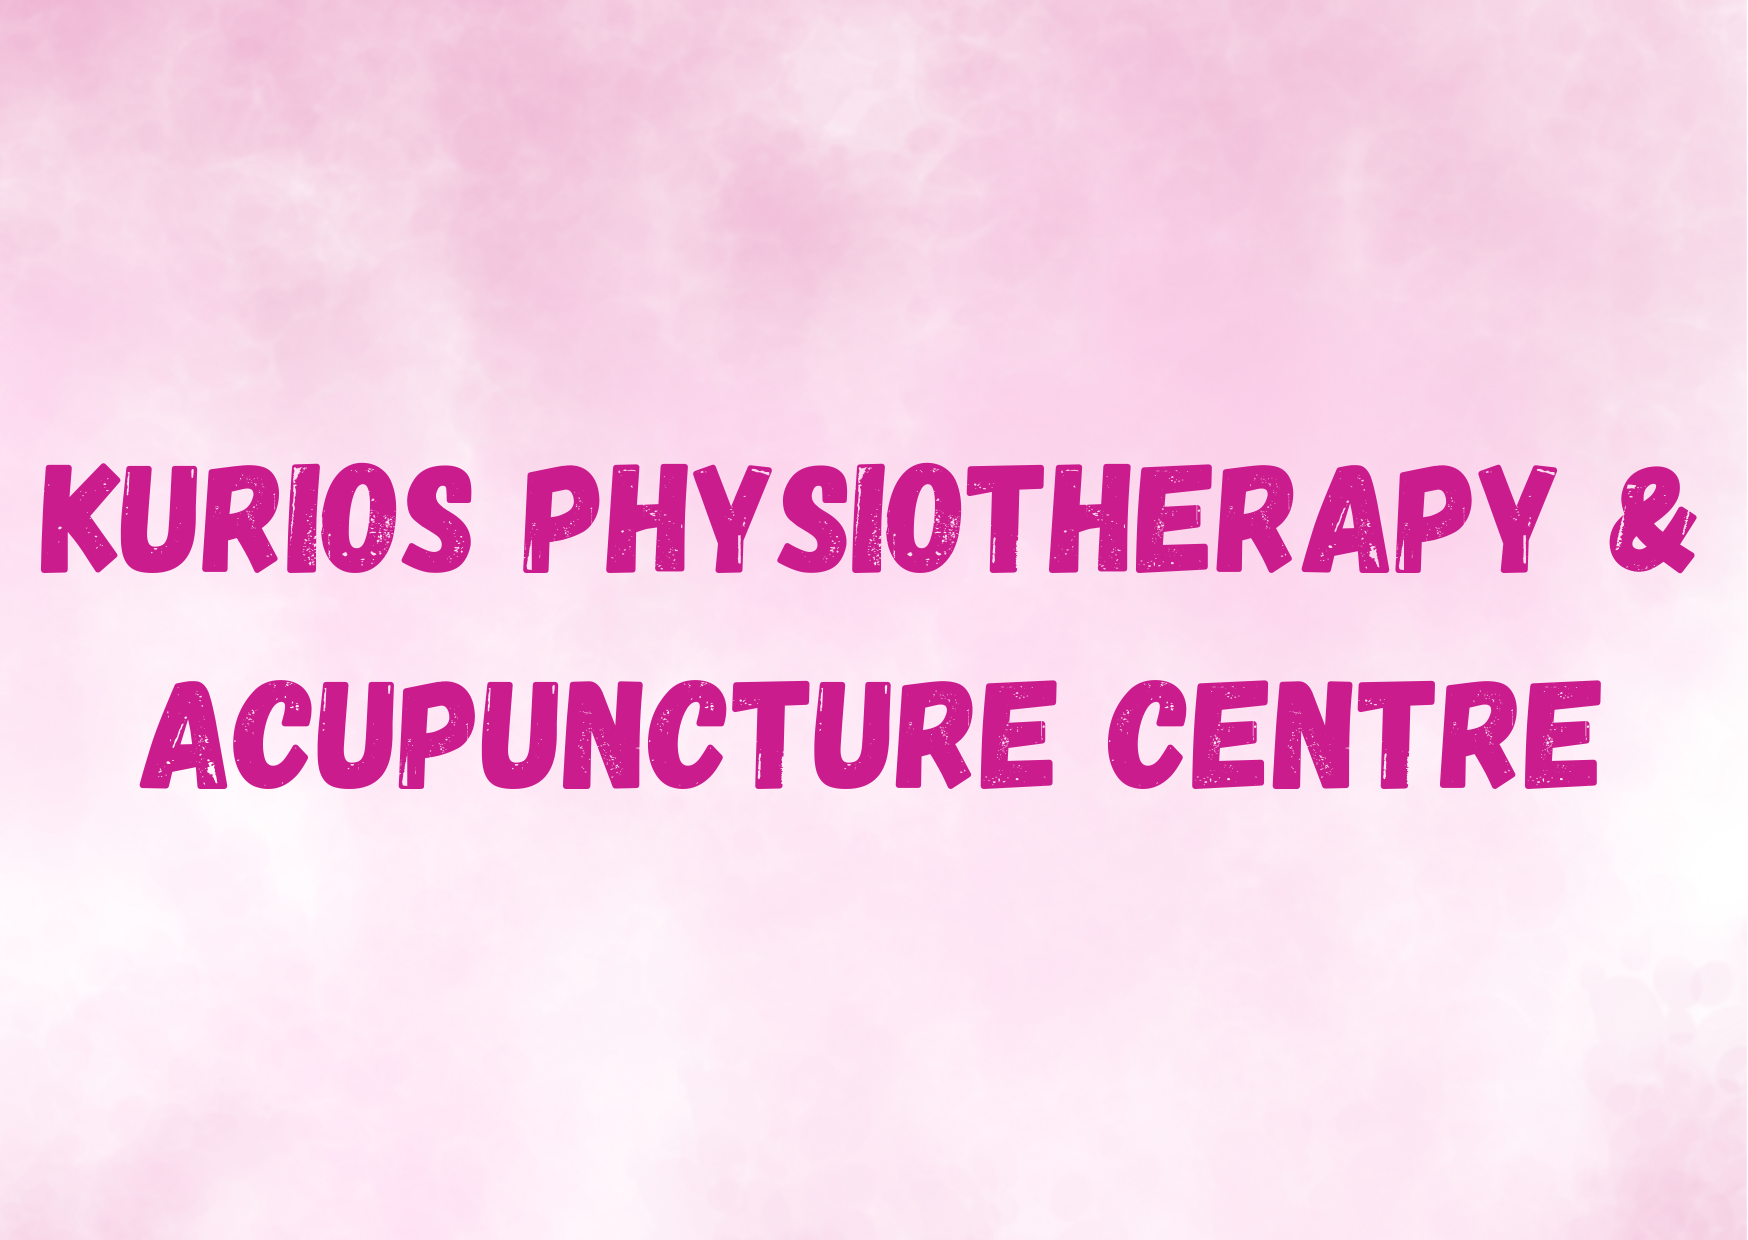 Kurios Physiotherapy & Acupuncture Centre,   